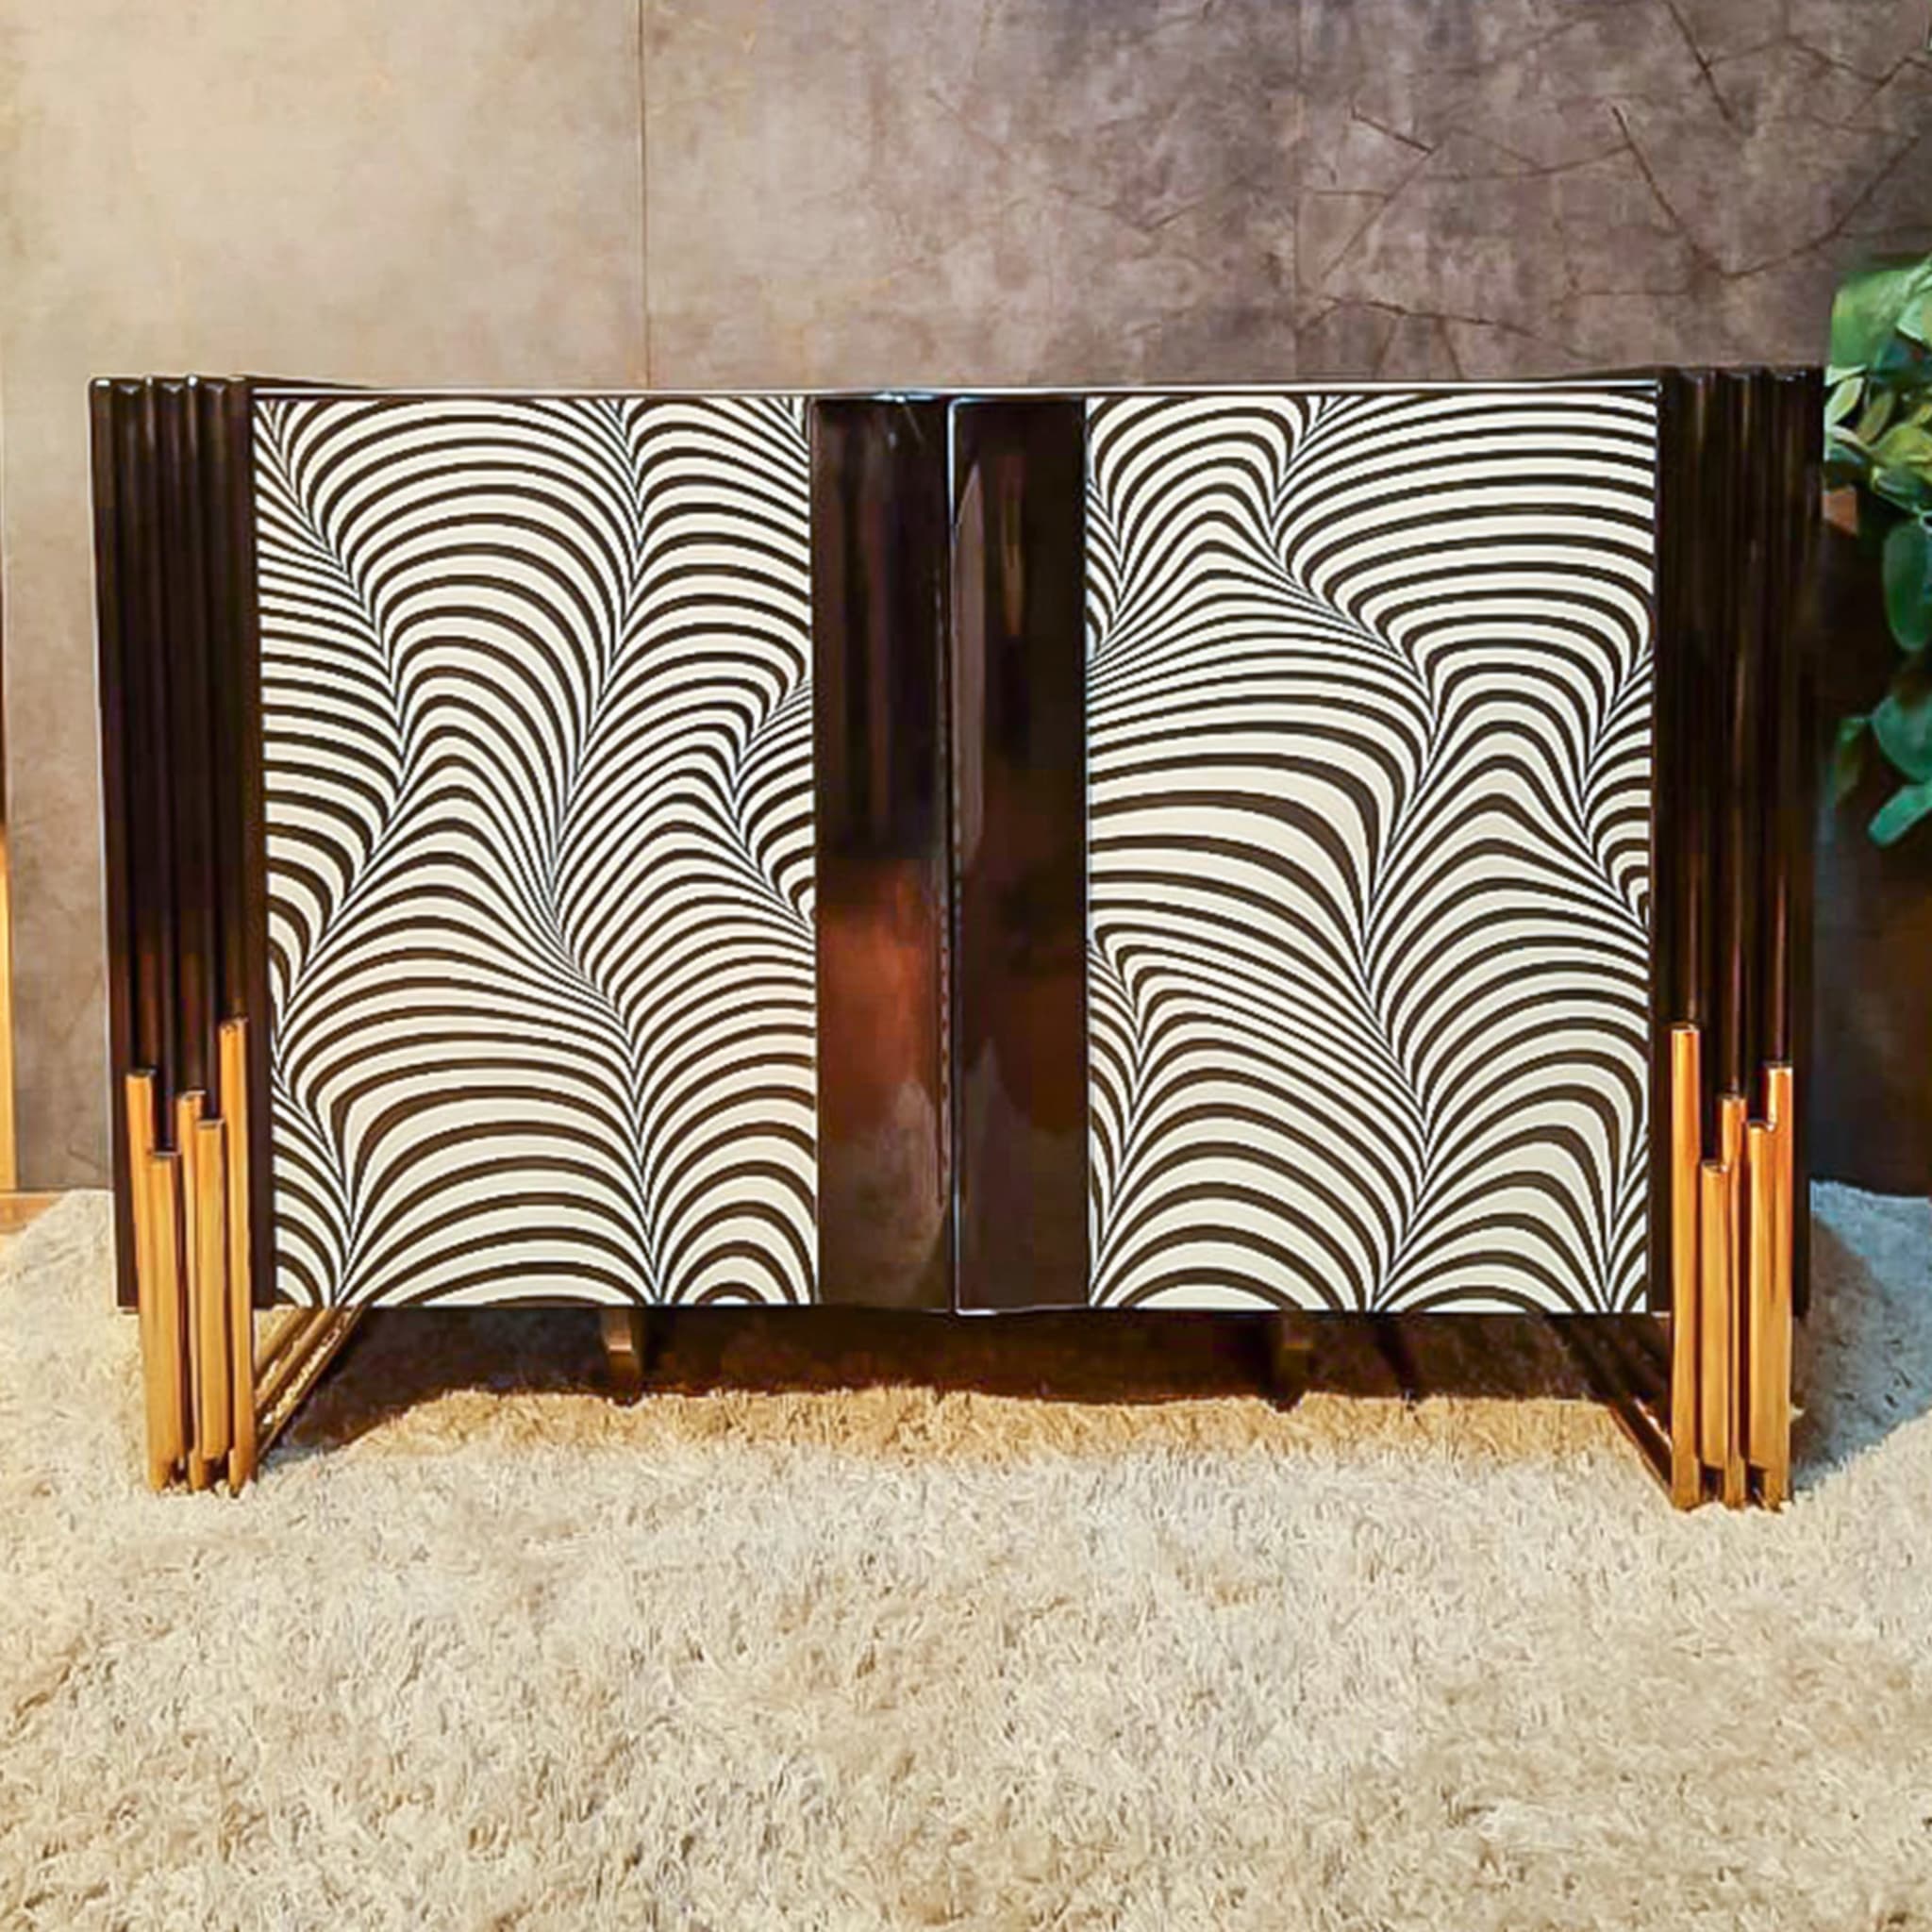 3D Black and White Cabinet - Alternative view 2